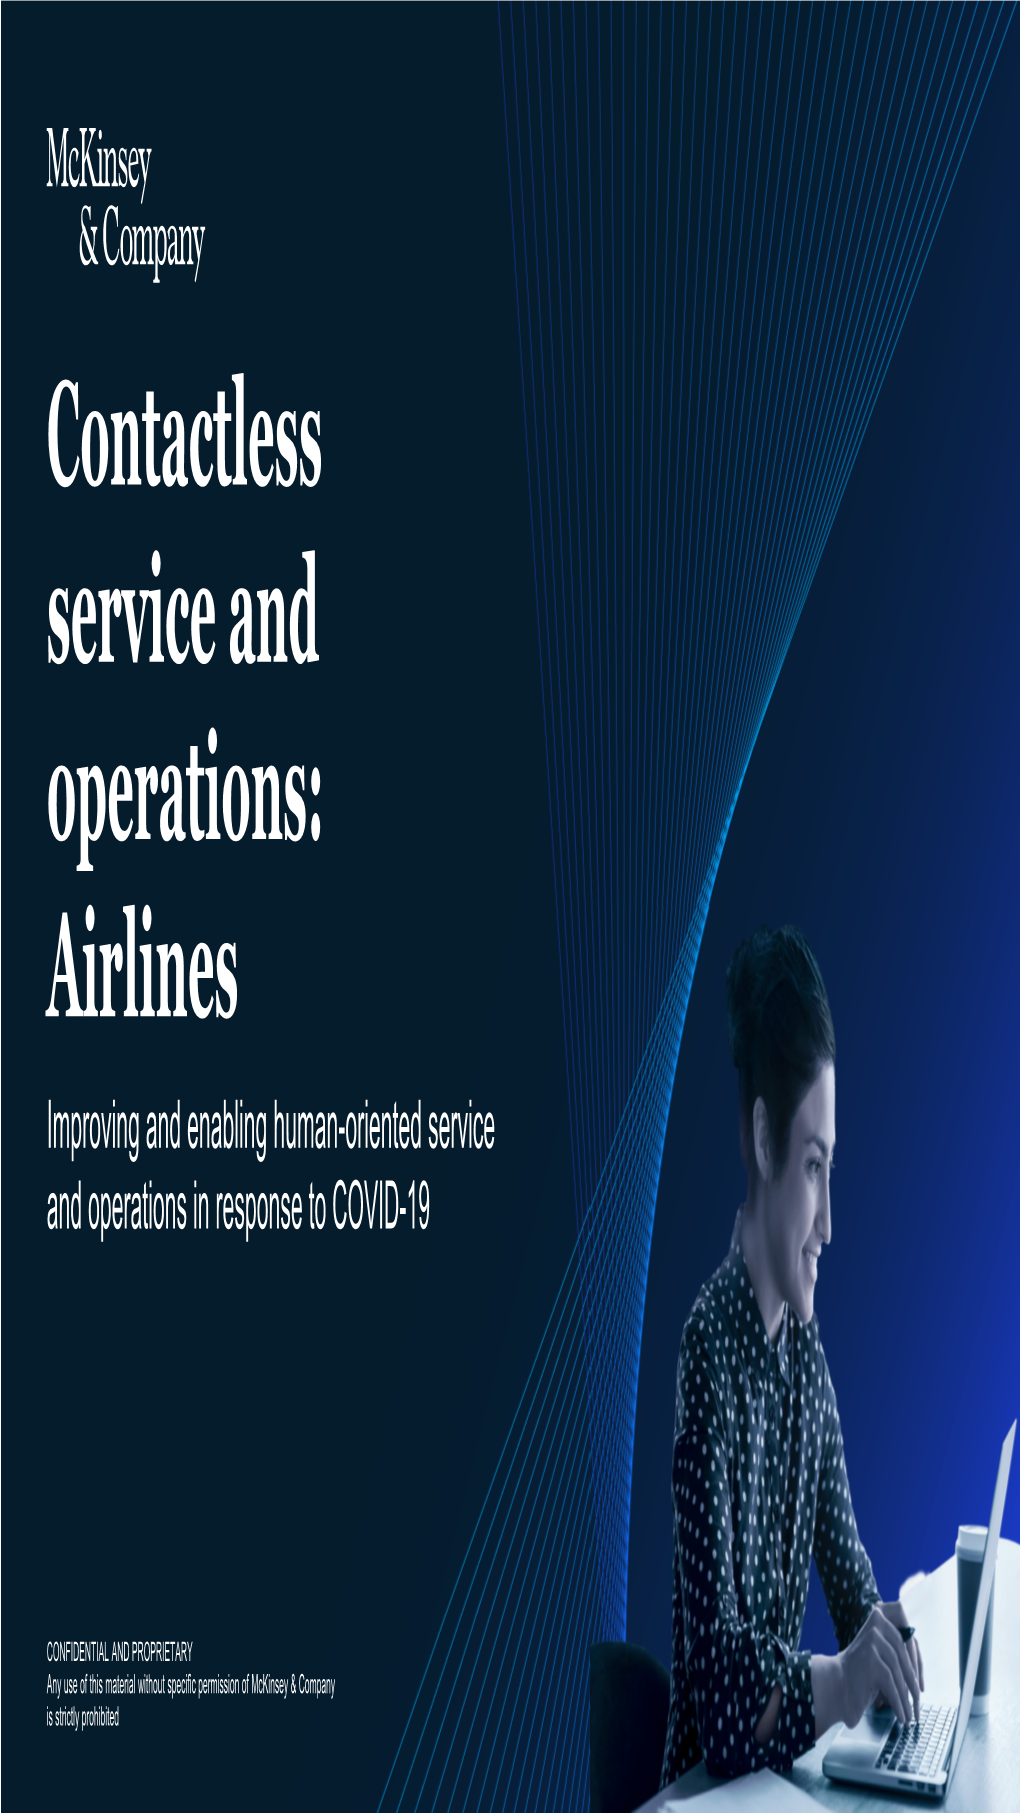 Airlines Improving and Enabling Human-Oriented Service and Operations in Response to COVID-19